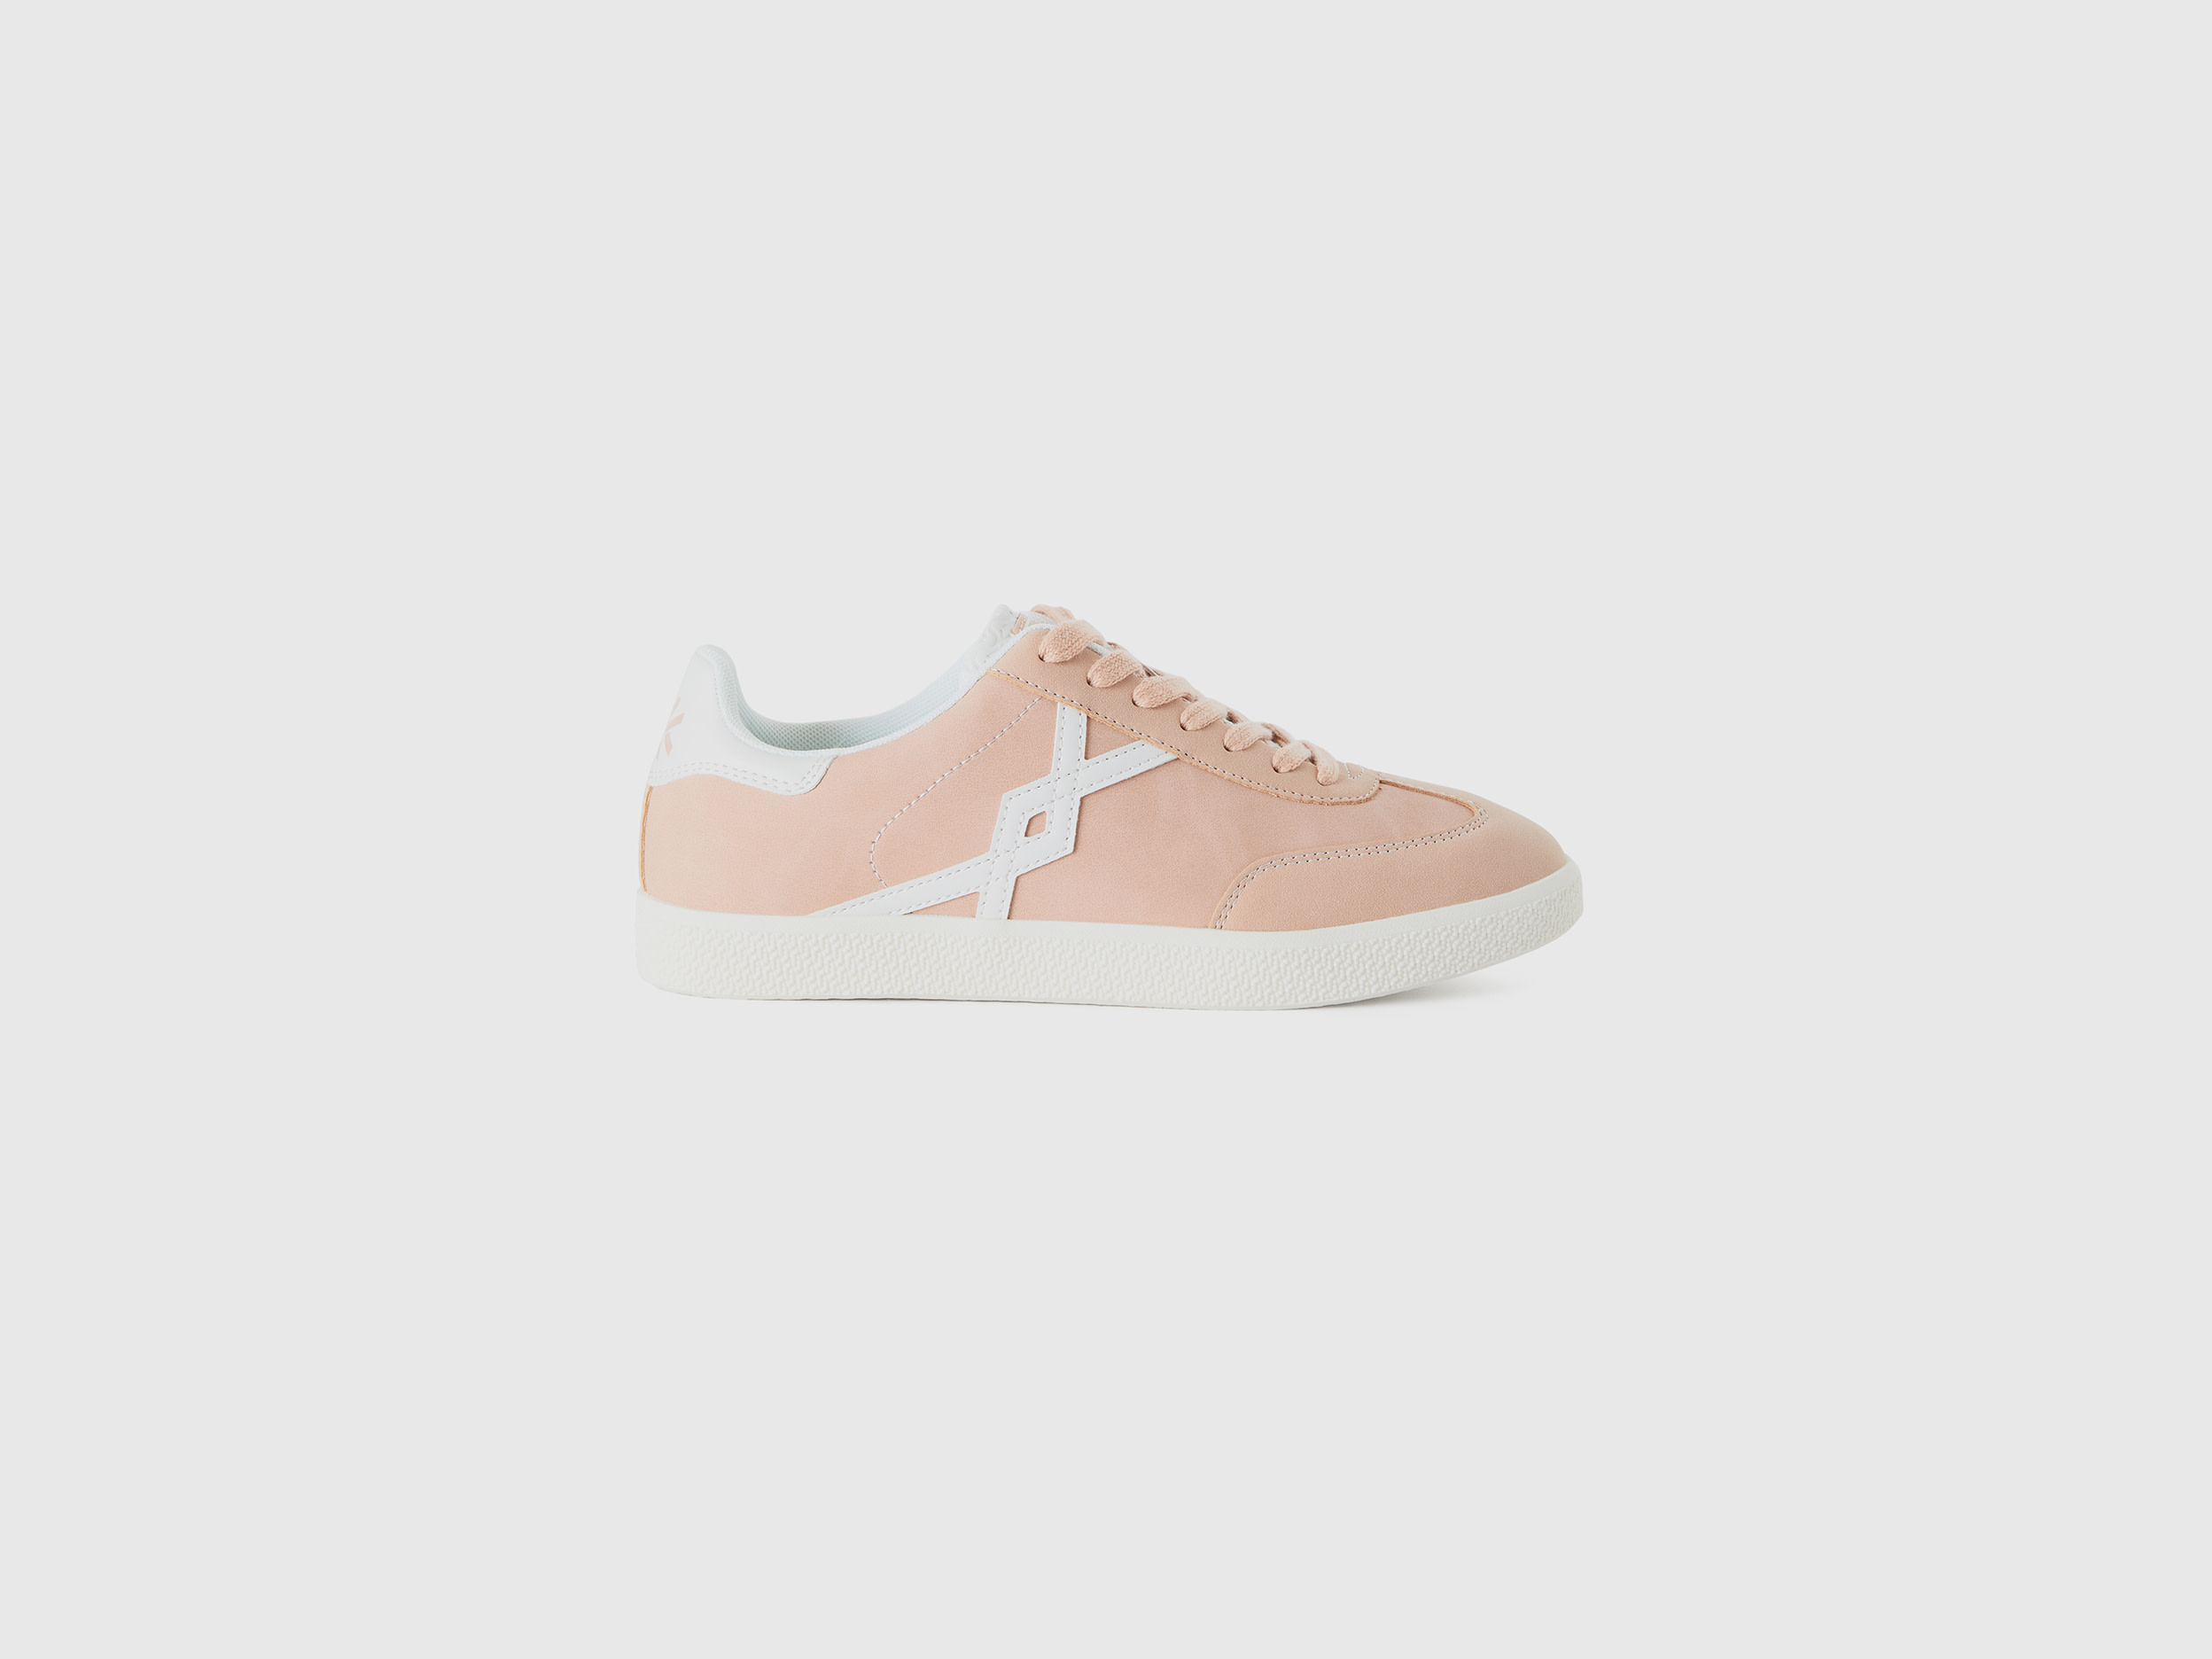 Benetton, Low-top Sneakers In Imitation Leather, size 4, Nude, Women